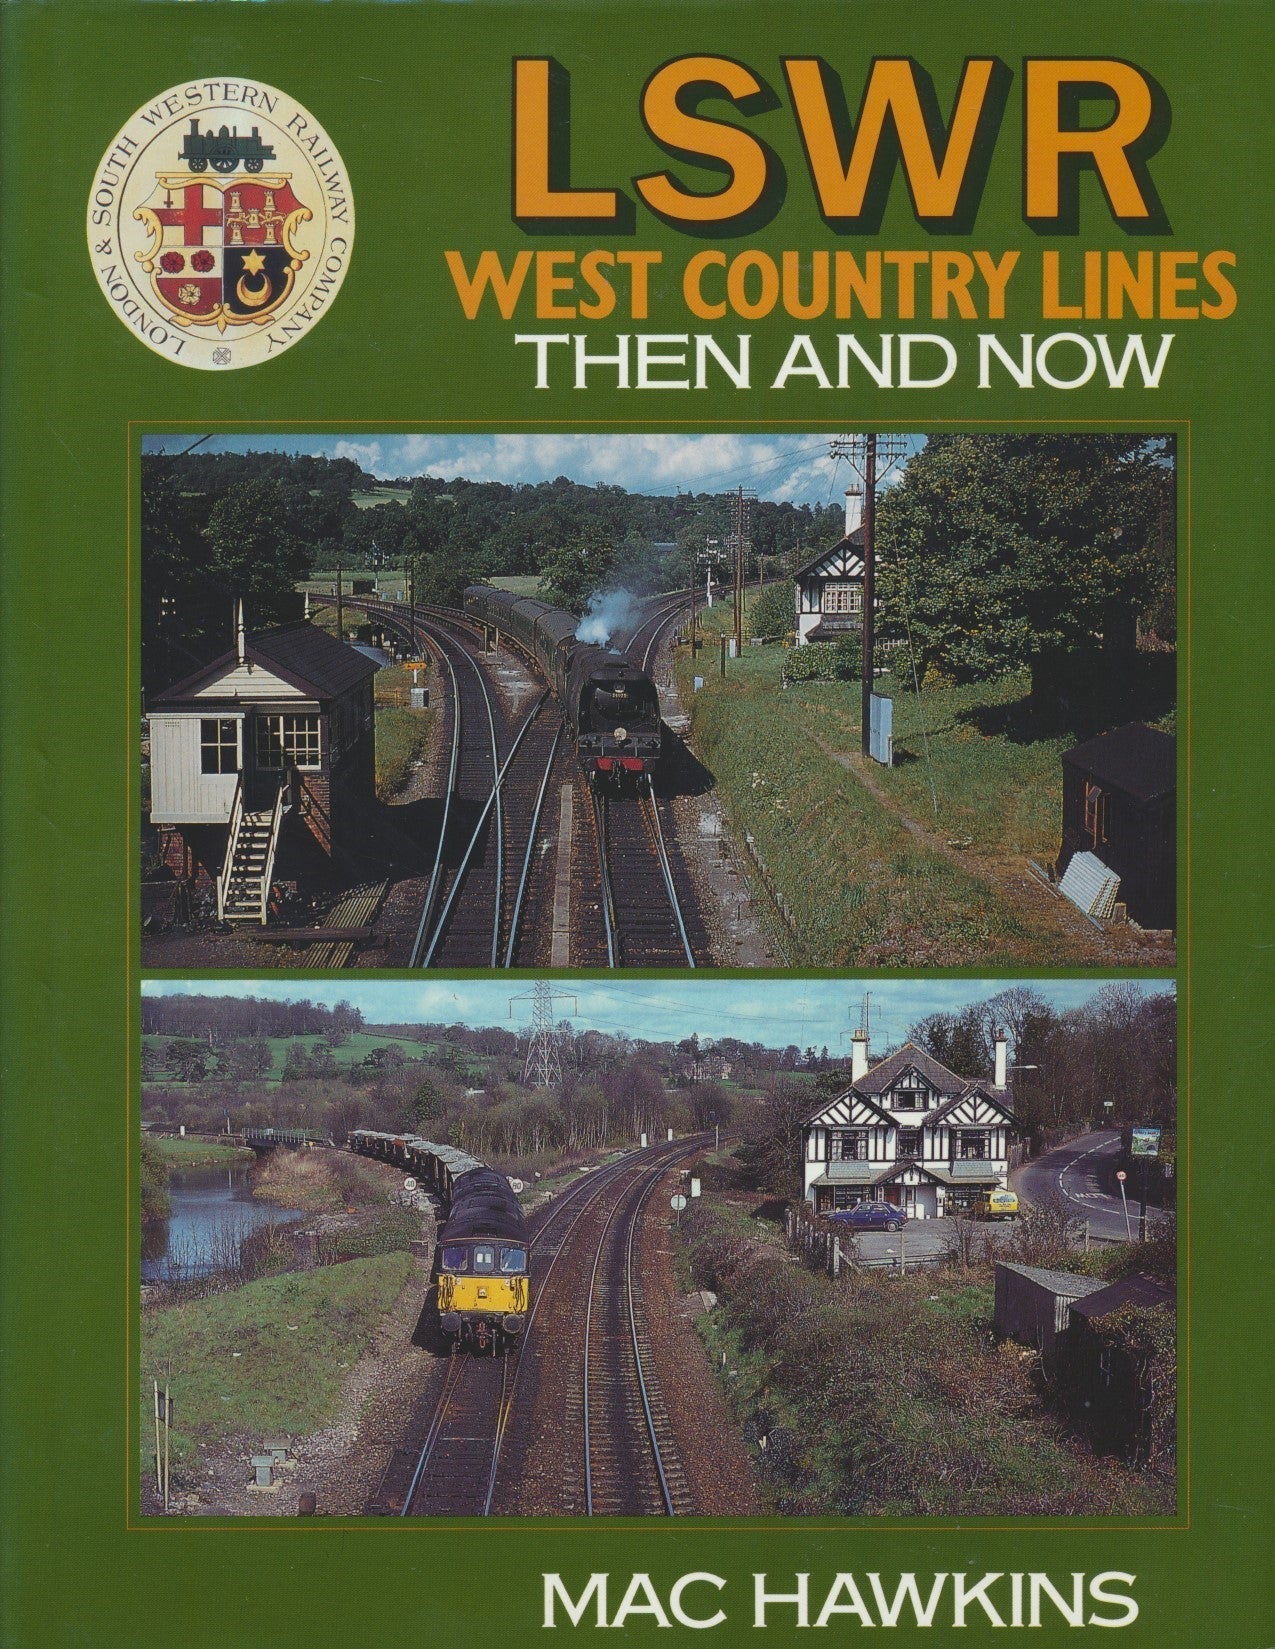 LSWR West Country Lines - Then and Now